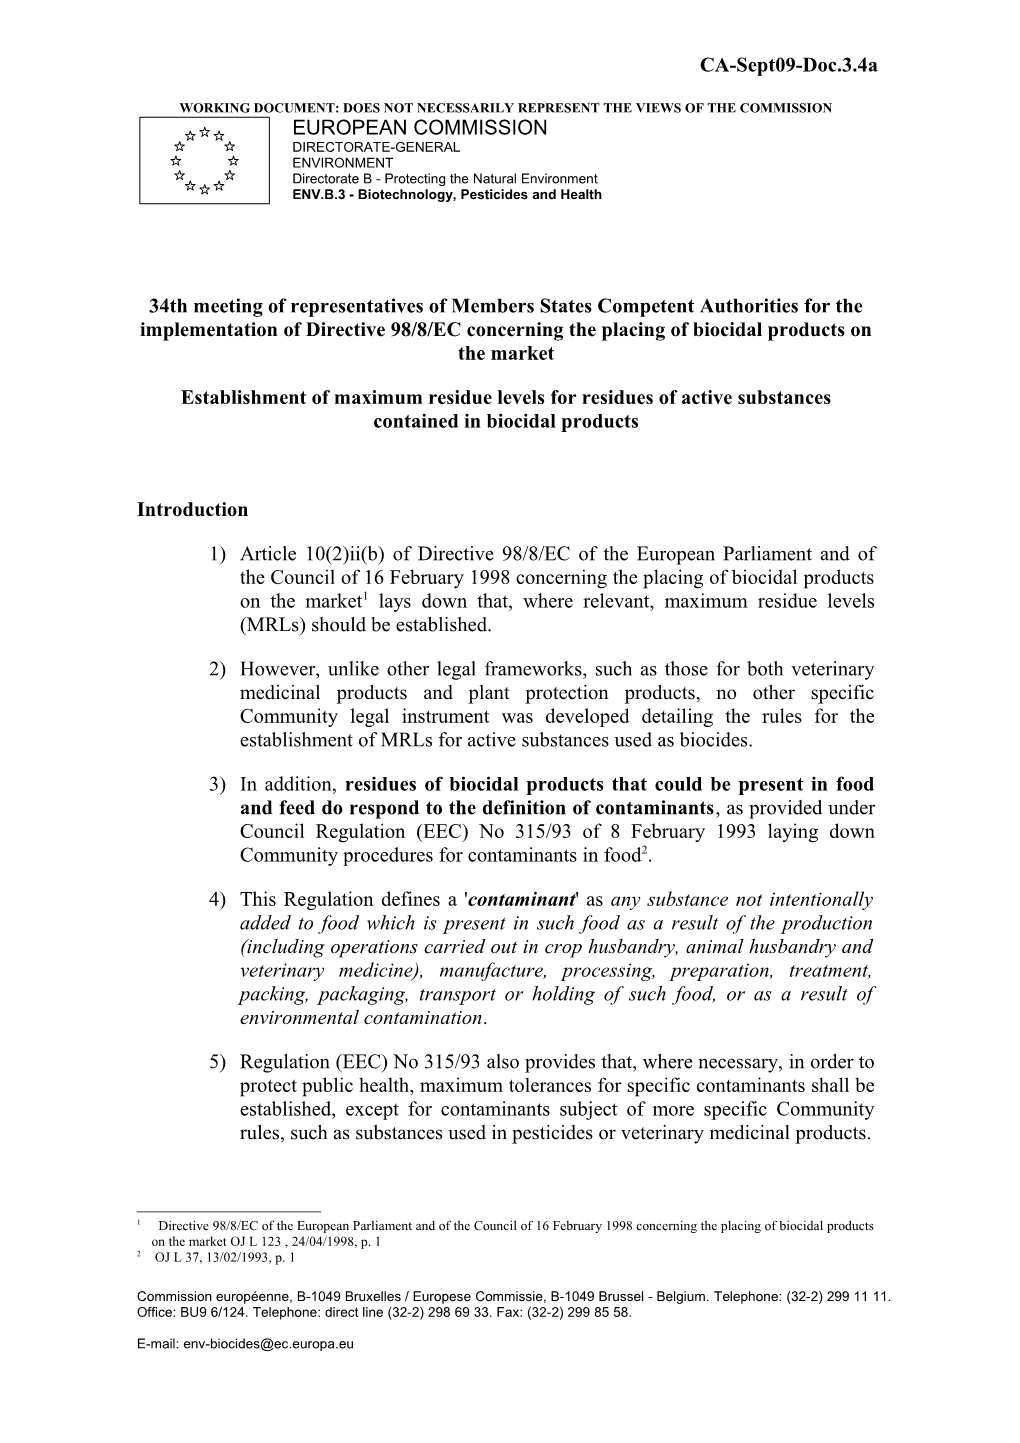 Establishment of Maximum Residue Levels for Residues of Active Substances Contained In